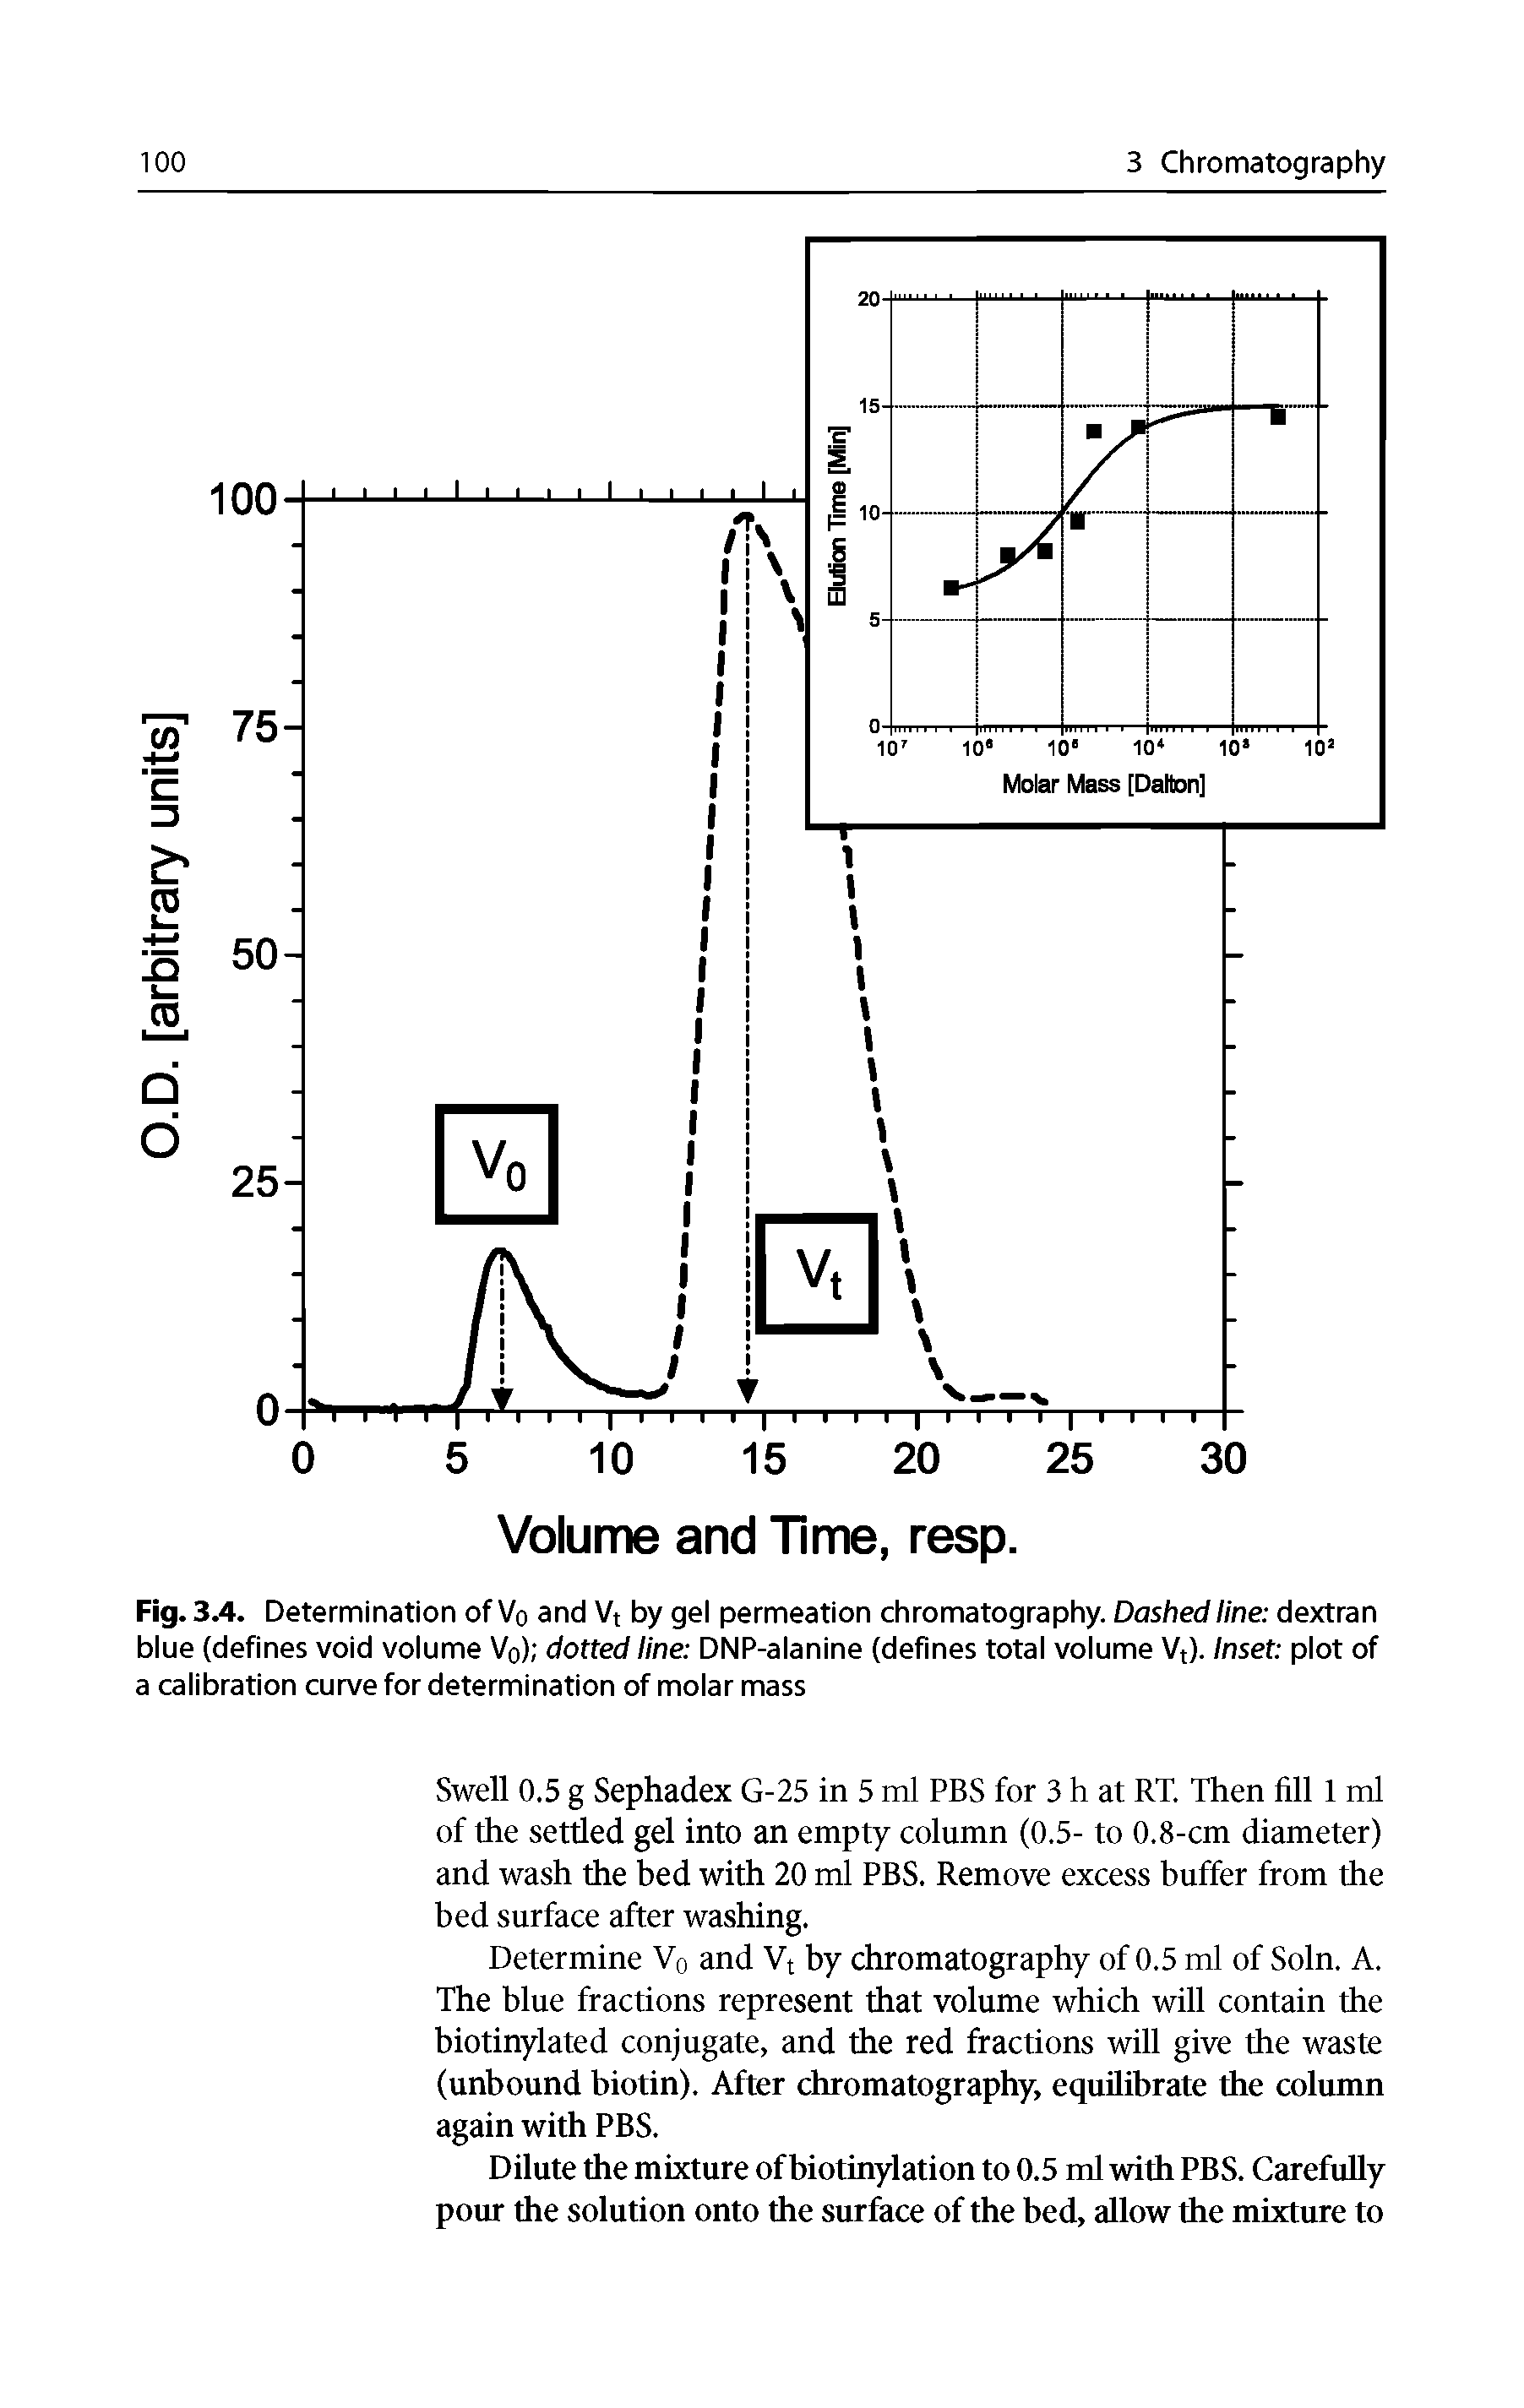 Fig. 3.4. Determination of Vo and Vt by gel permeation chromatography. Dashed line dextran blue (defines void volume Vo) dotted line DNP-alanine (defines total volume Vt). Inset plot of a calibration curve for determination of molar mass...